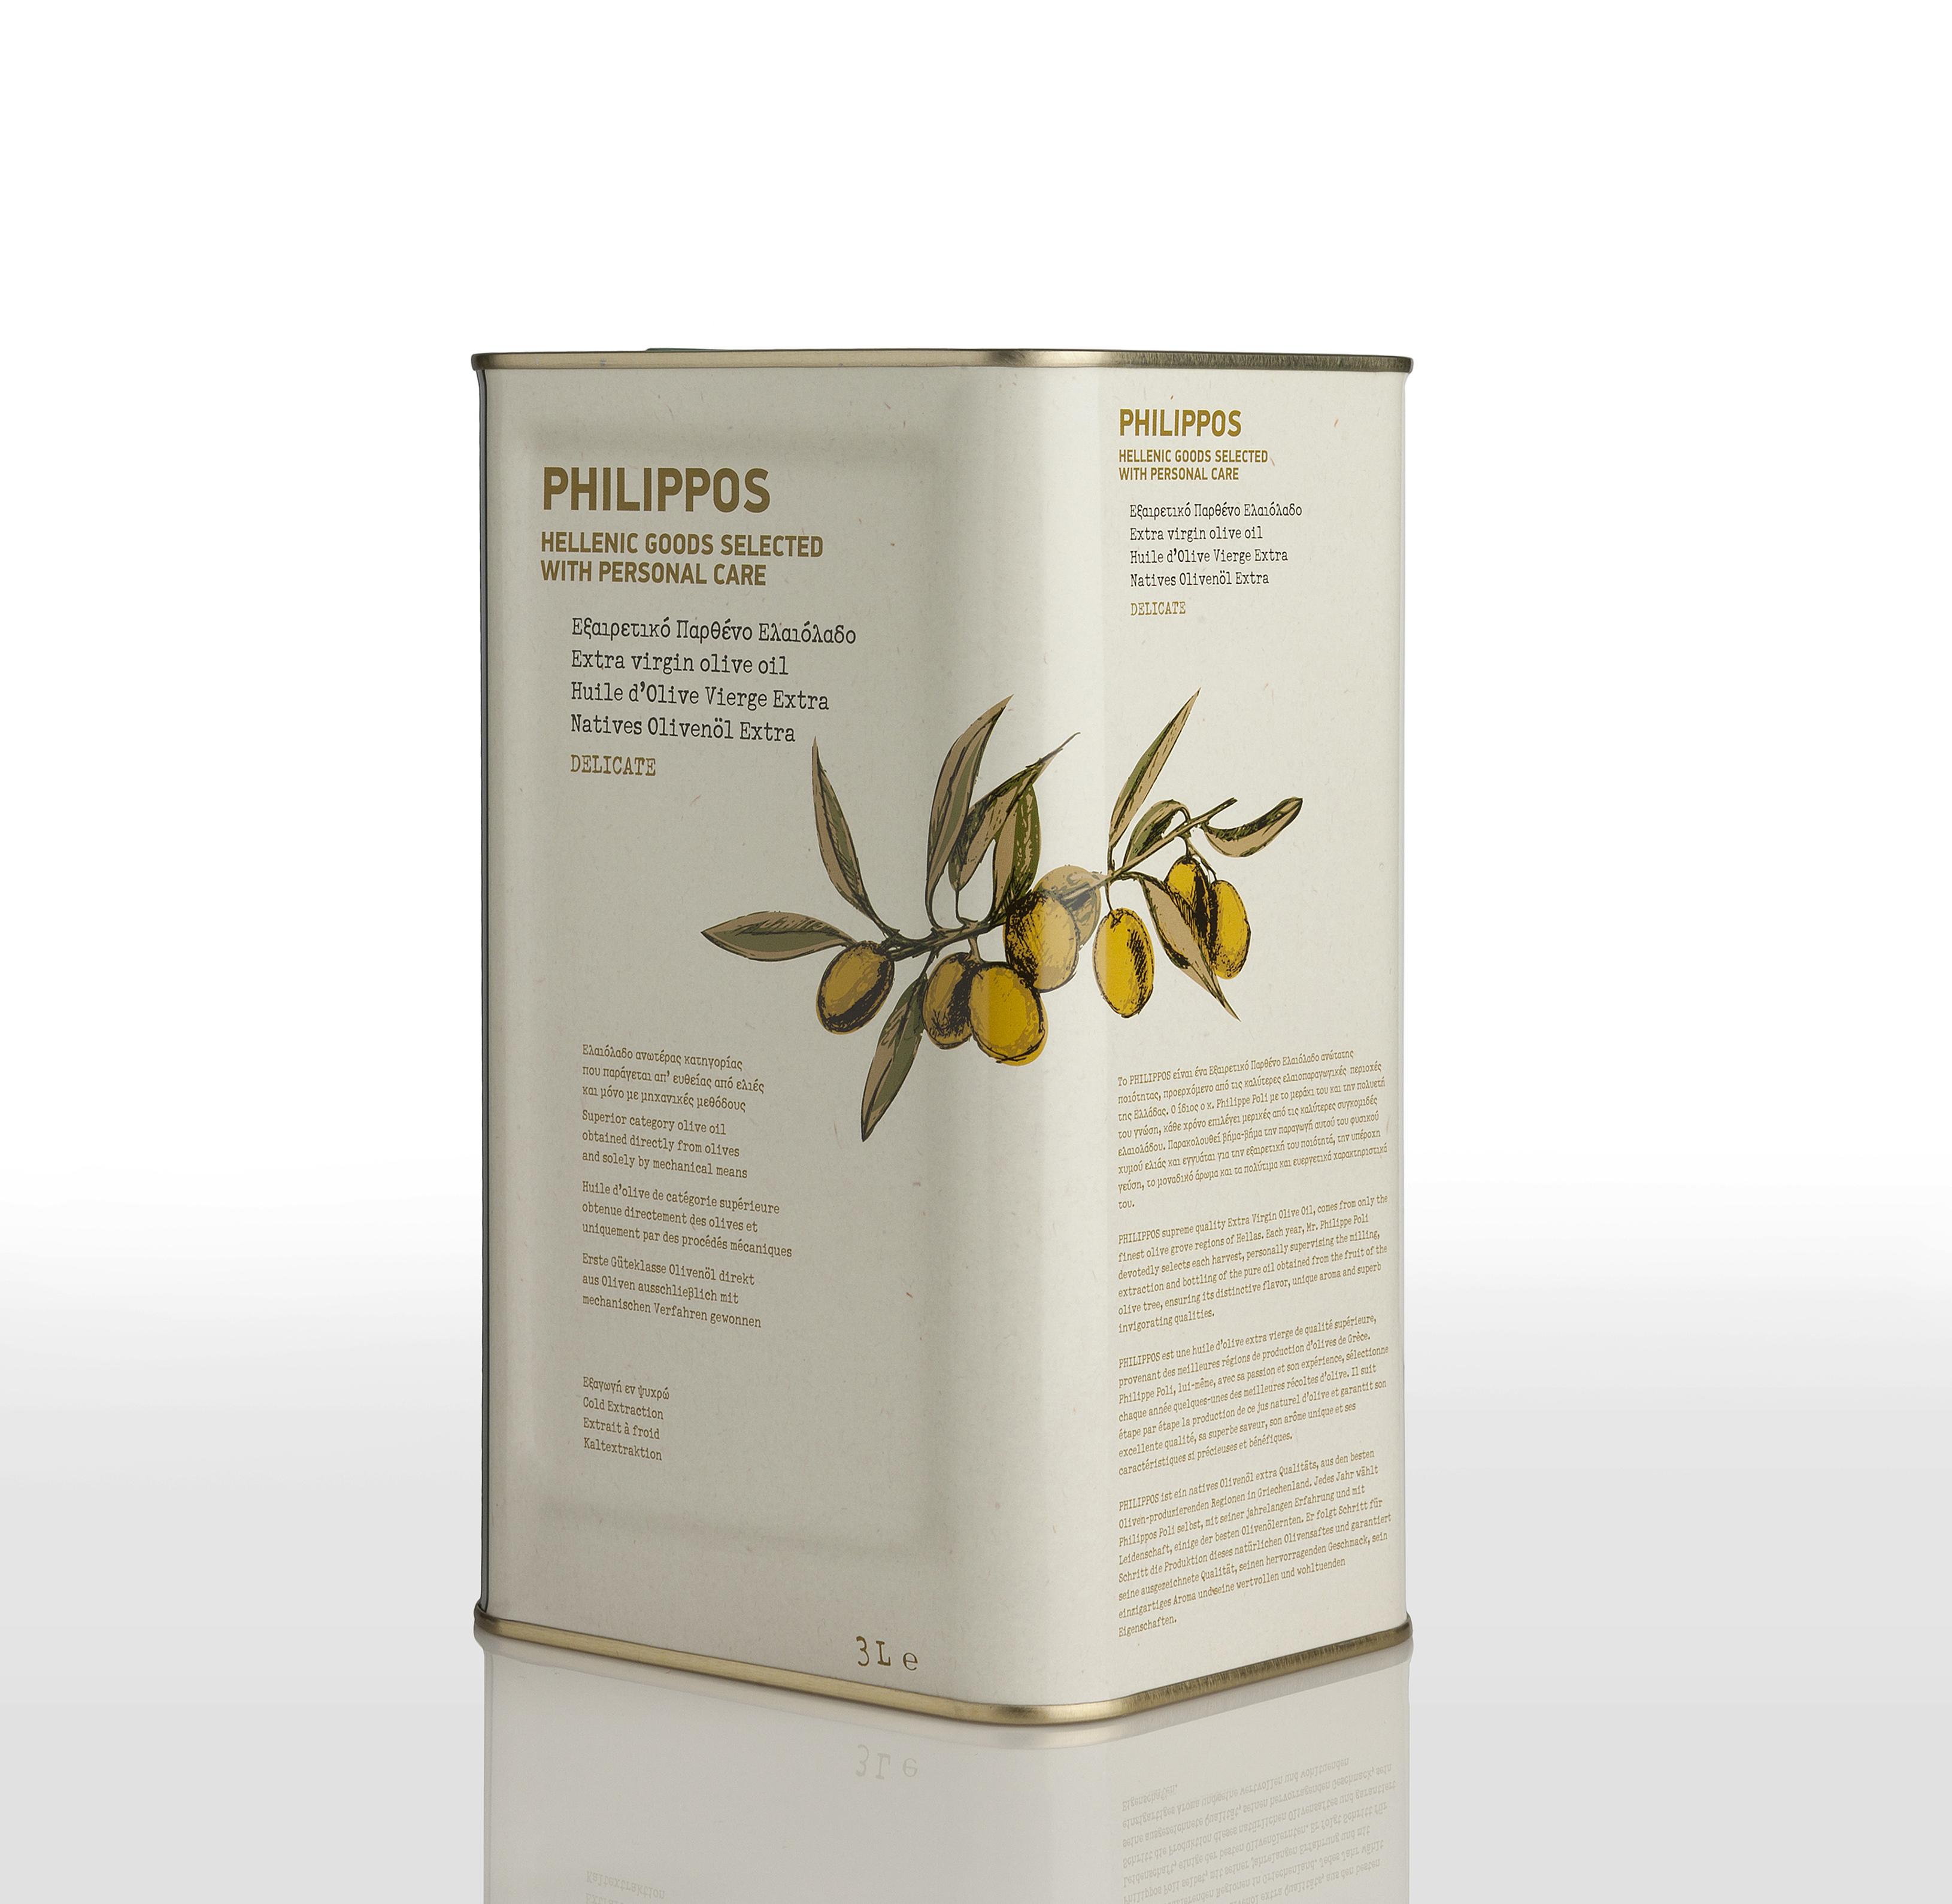 PHILIPPOS CLASSIC XL/PHILIPPOS DELICATE XL olive oil